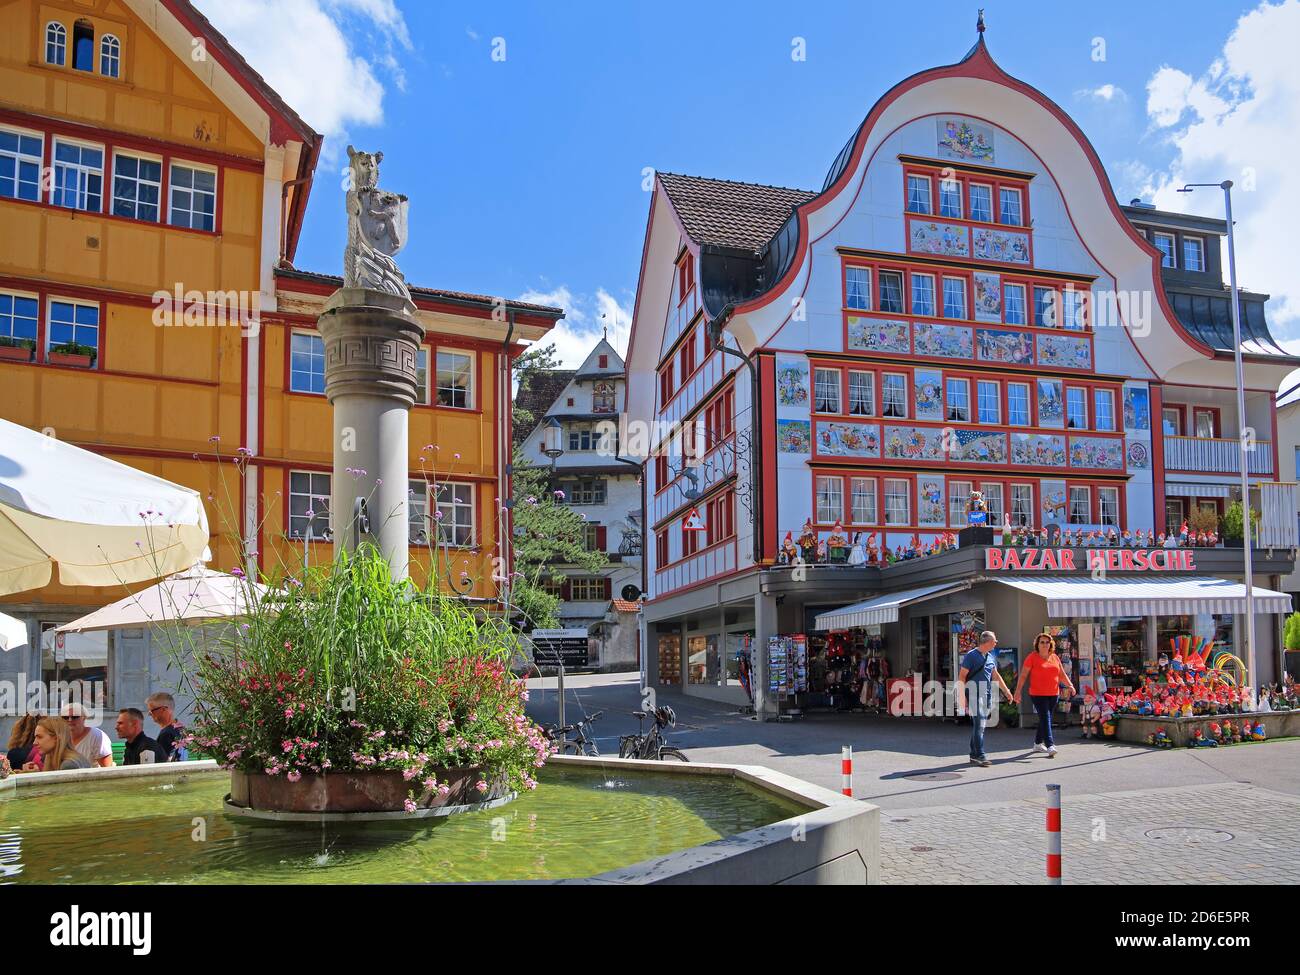 Fountain with typical painted houses in the village center, Appenzell, Appenzeller Land, Canton of Appenzell-Innerrhoden, Switzerland Stock Photo